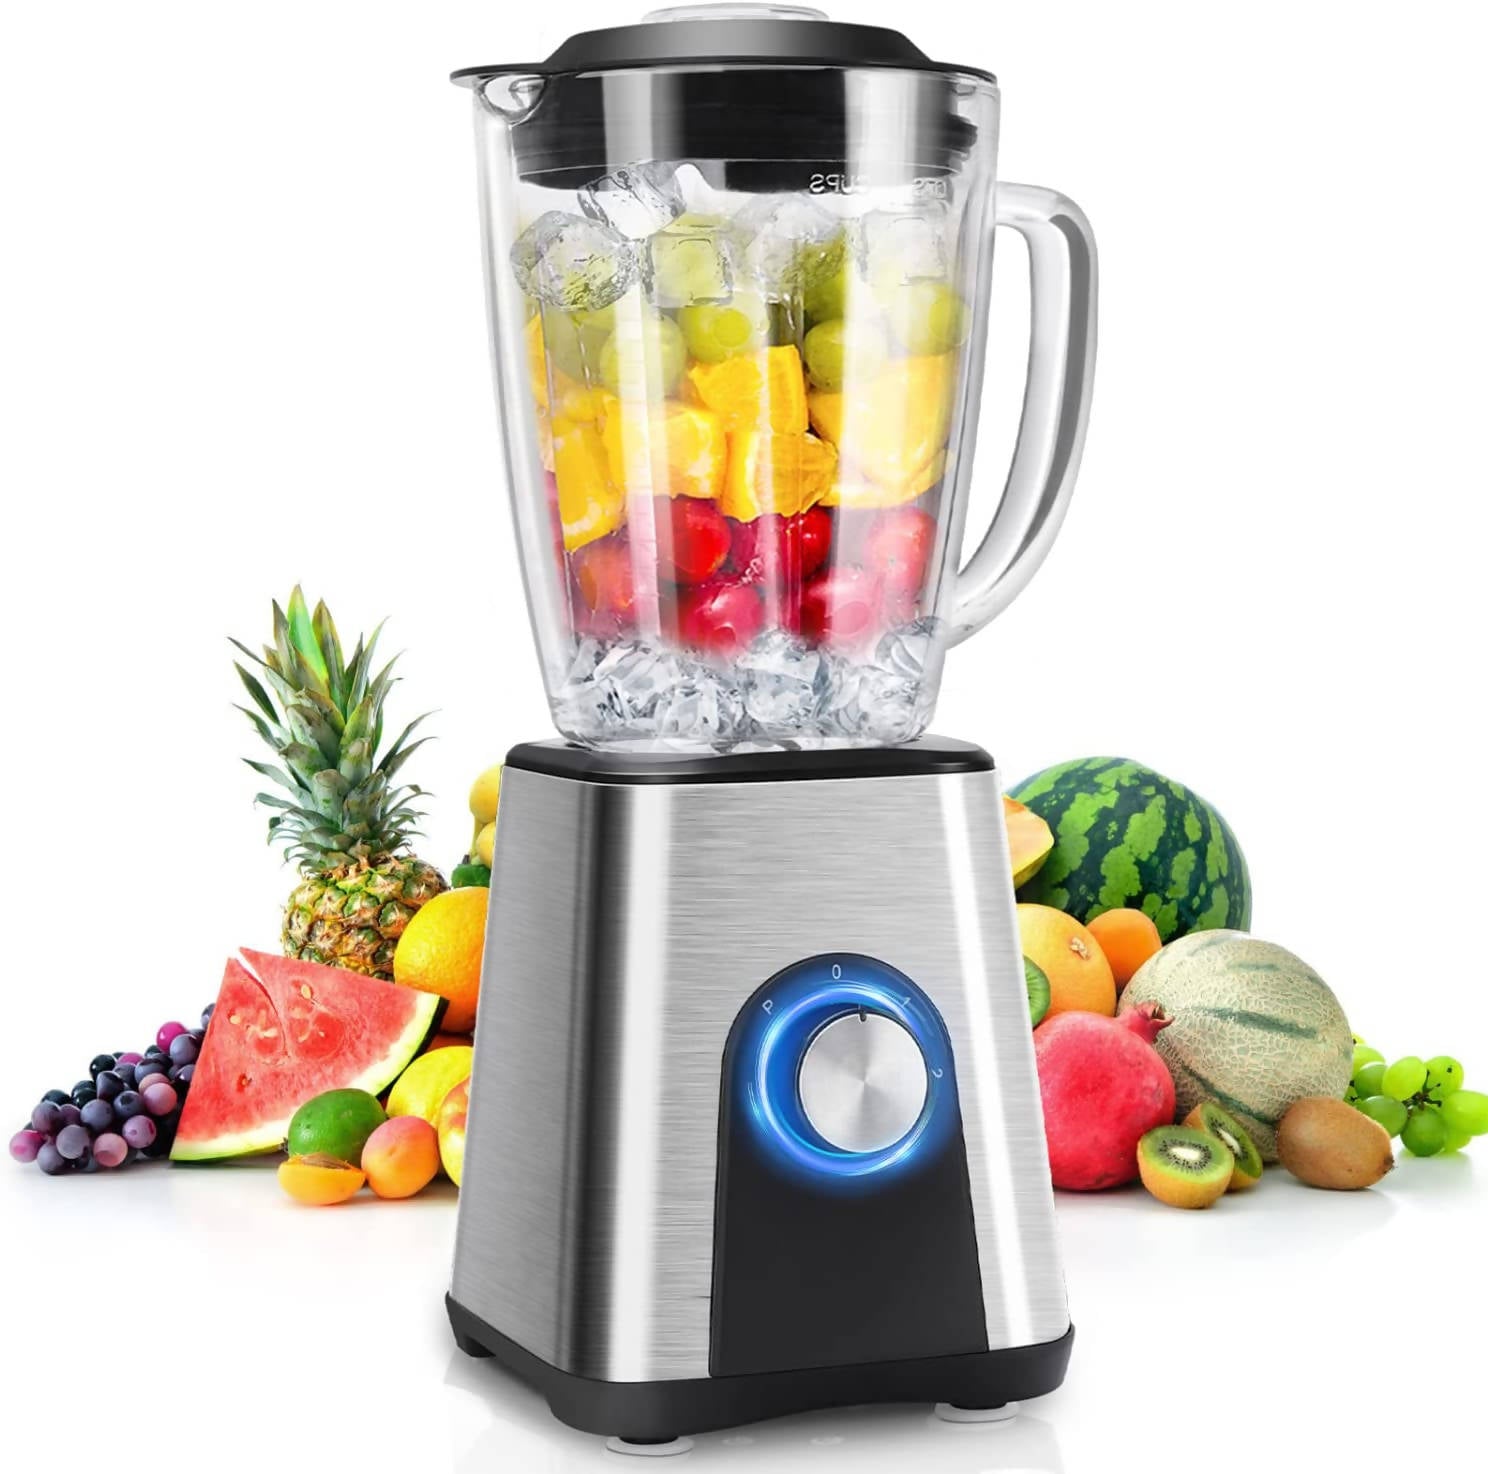 Aigostar Archer Stand Blender, 1200 W Smoothie Mixer, Smoothie Maker with 1.8 L Glass Container, Multifunctional, Ice-Crush Function, Dishwasher Safe, 6 Blade, BPA Free